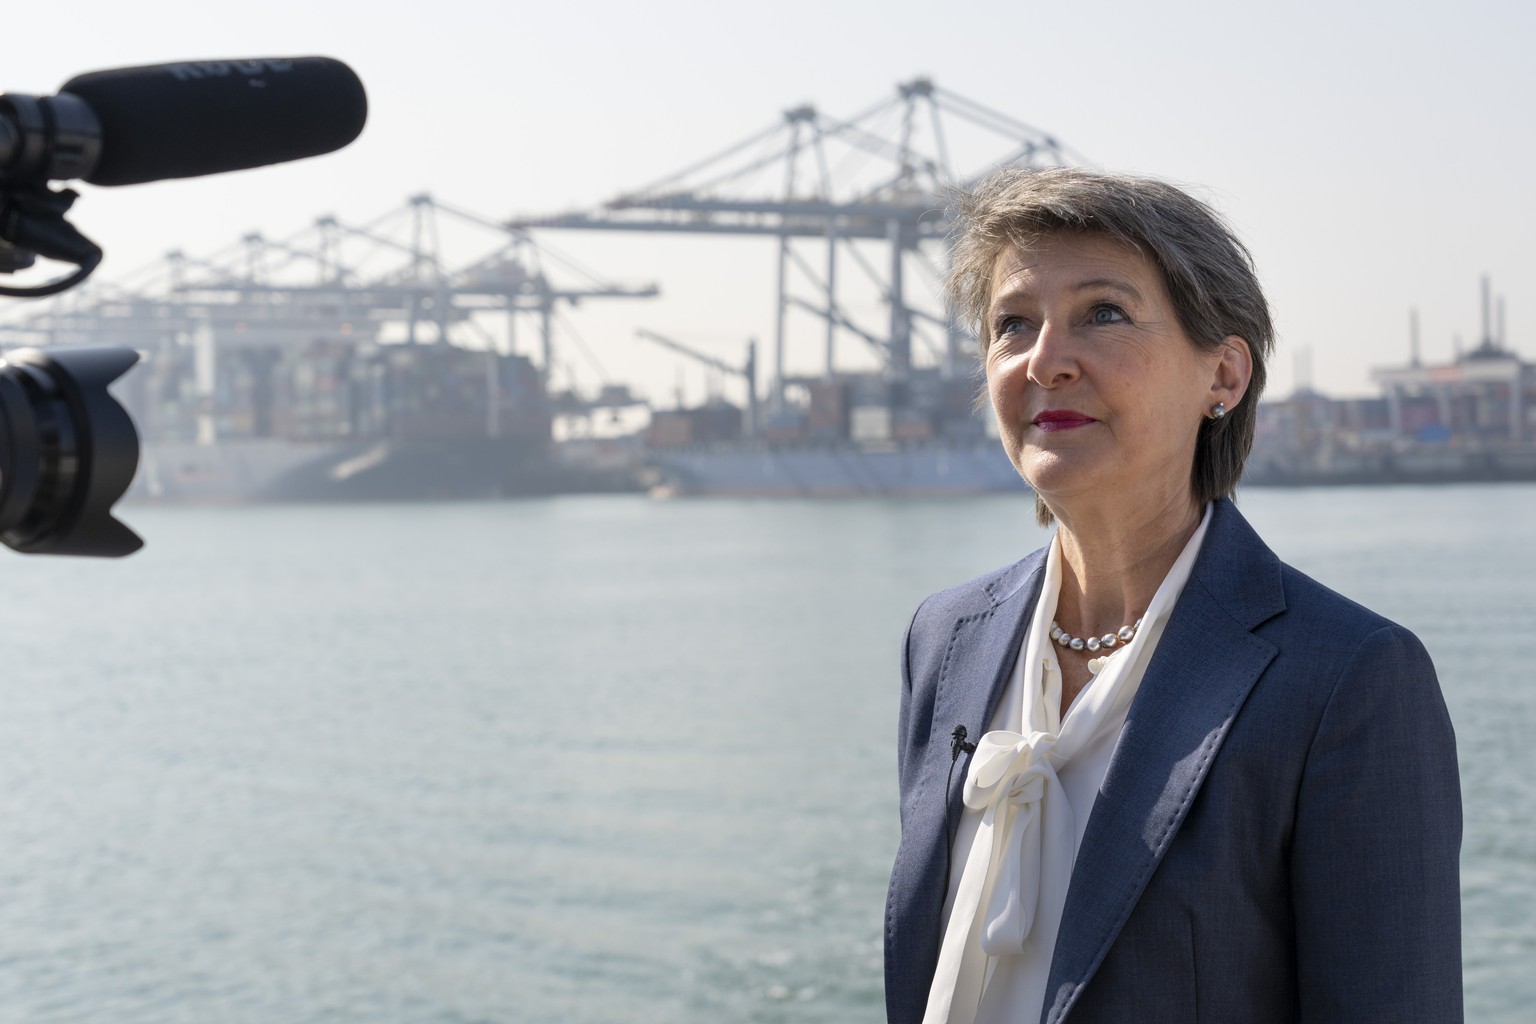 Swiss Federal Councillor Simonetta Sommaruga is interviewed during a tour of the Port of Rotterdam, Netherlands, Wednesday, March 23, 2022. (AP Photo/Peter Dejong)